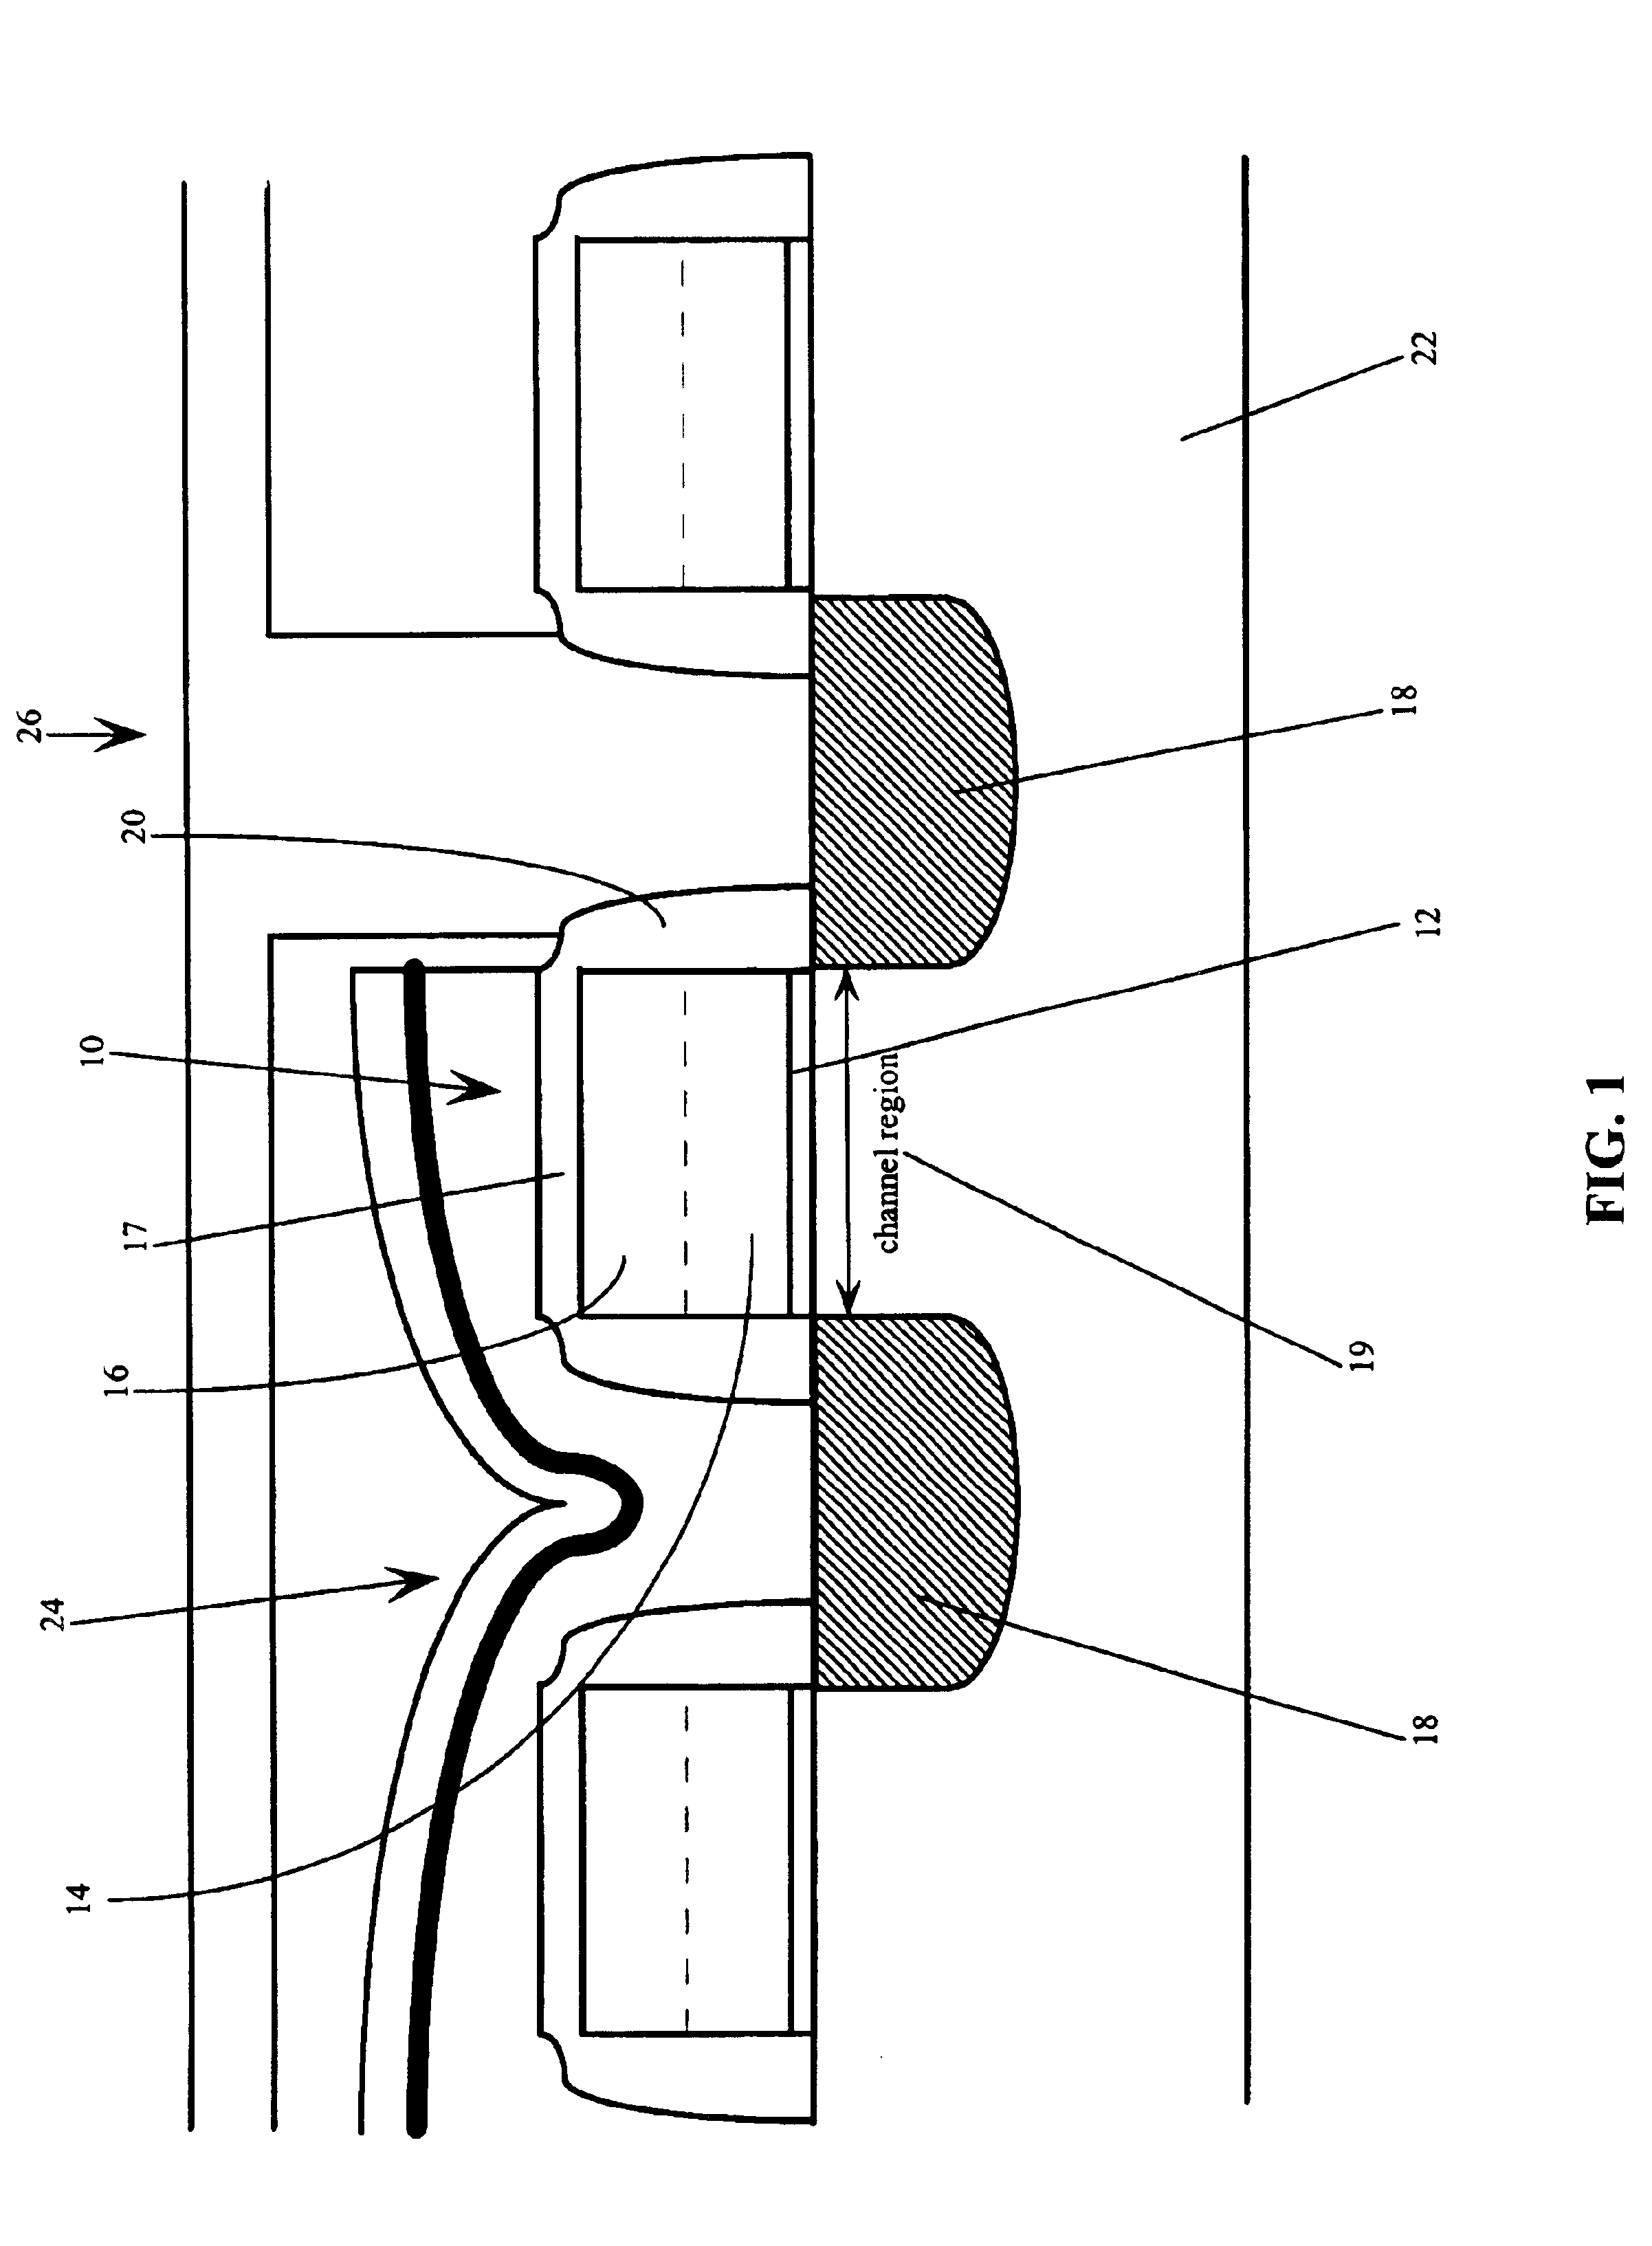 Use of gate electrode workfunction to improve DRAM refresh